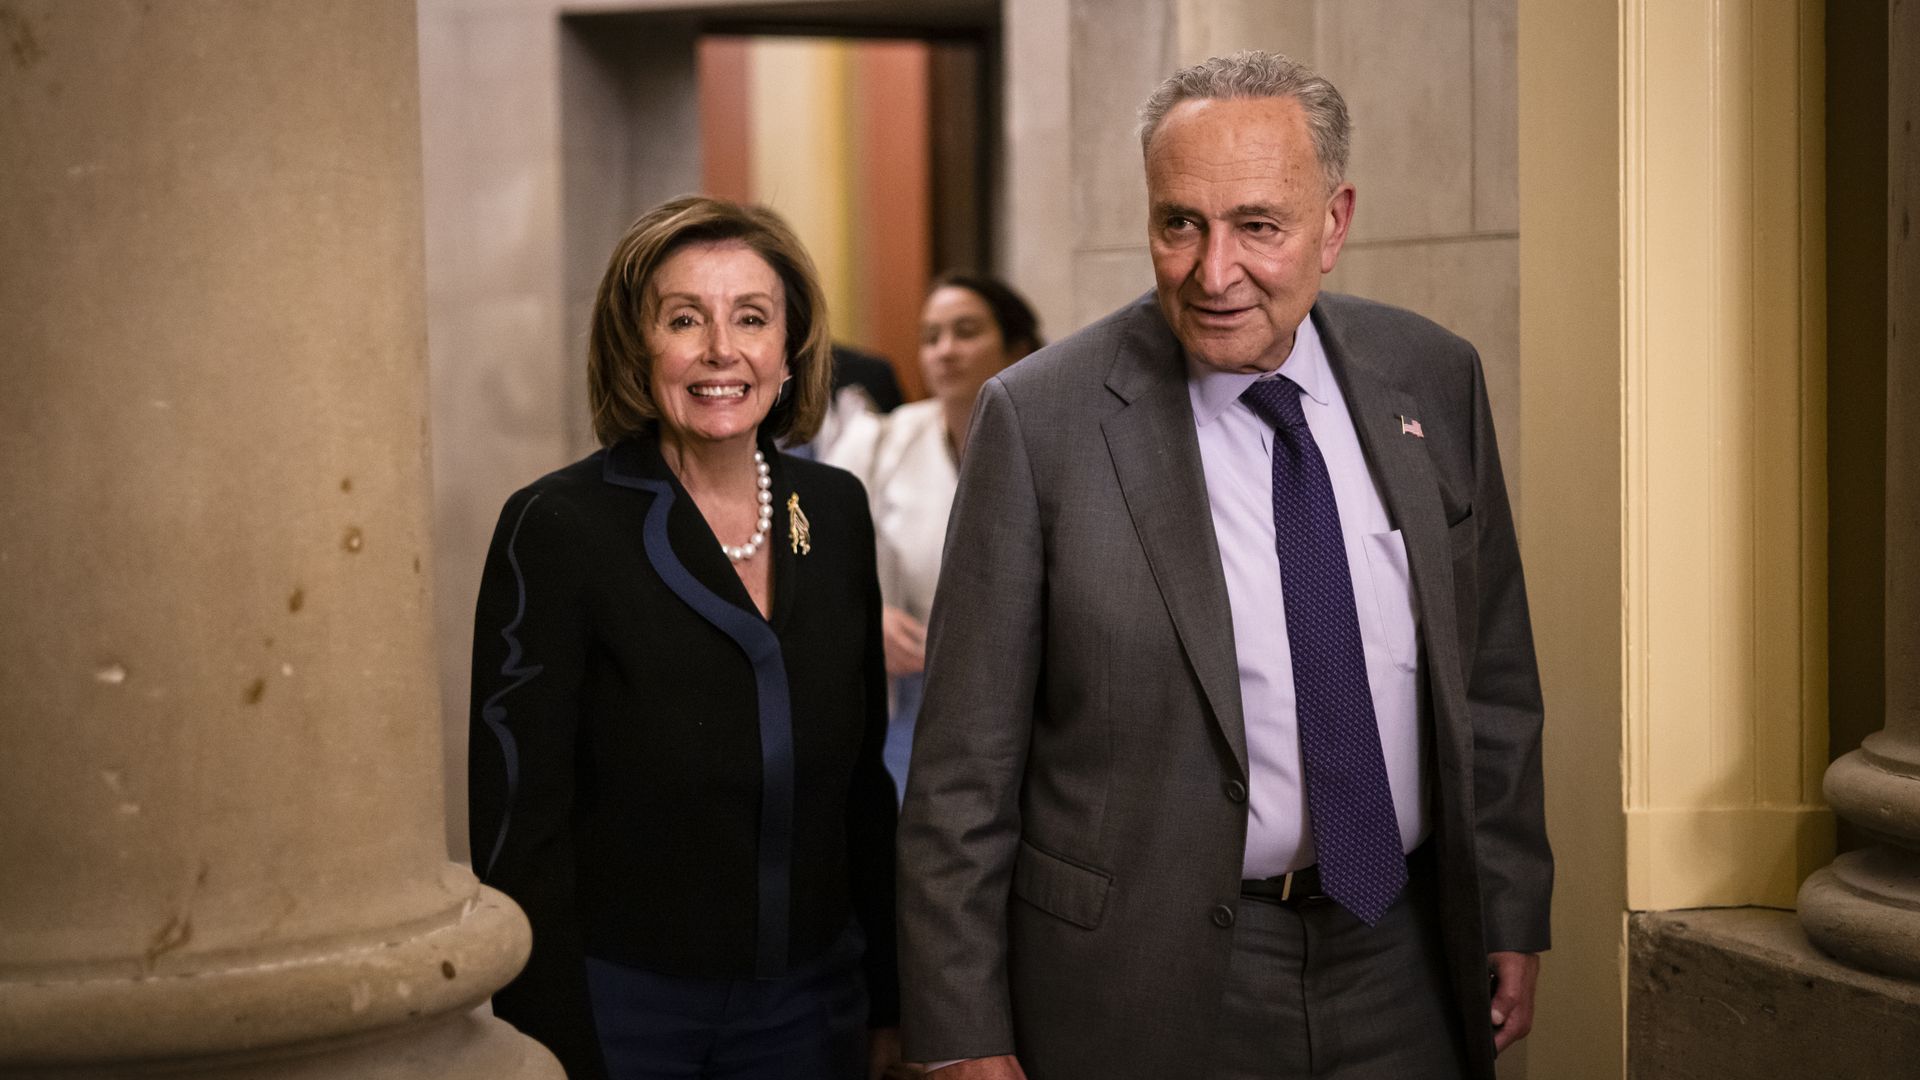 Nancy Pelosi (D-CA) and Chuck Schumer (D-NY) smiling at the U.S. Capitol on June 23